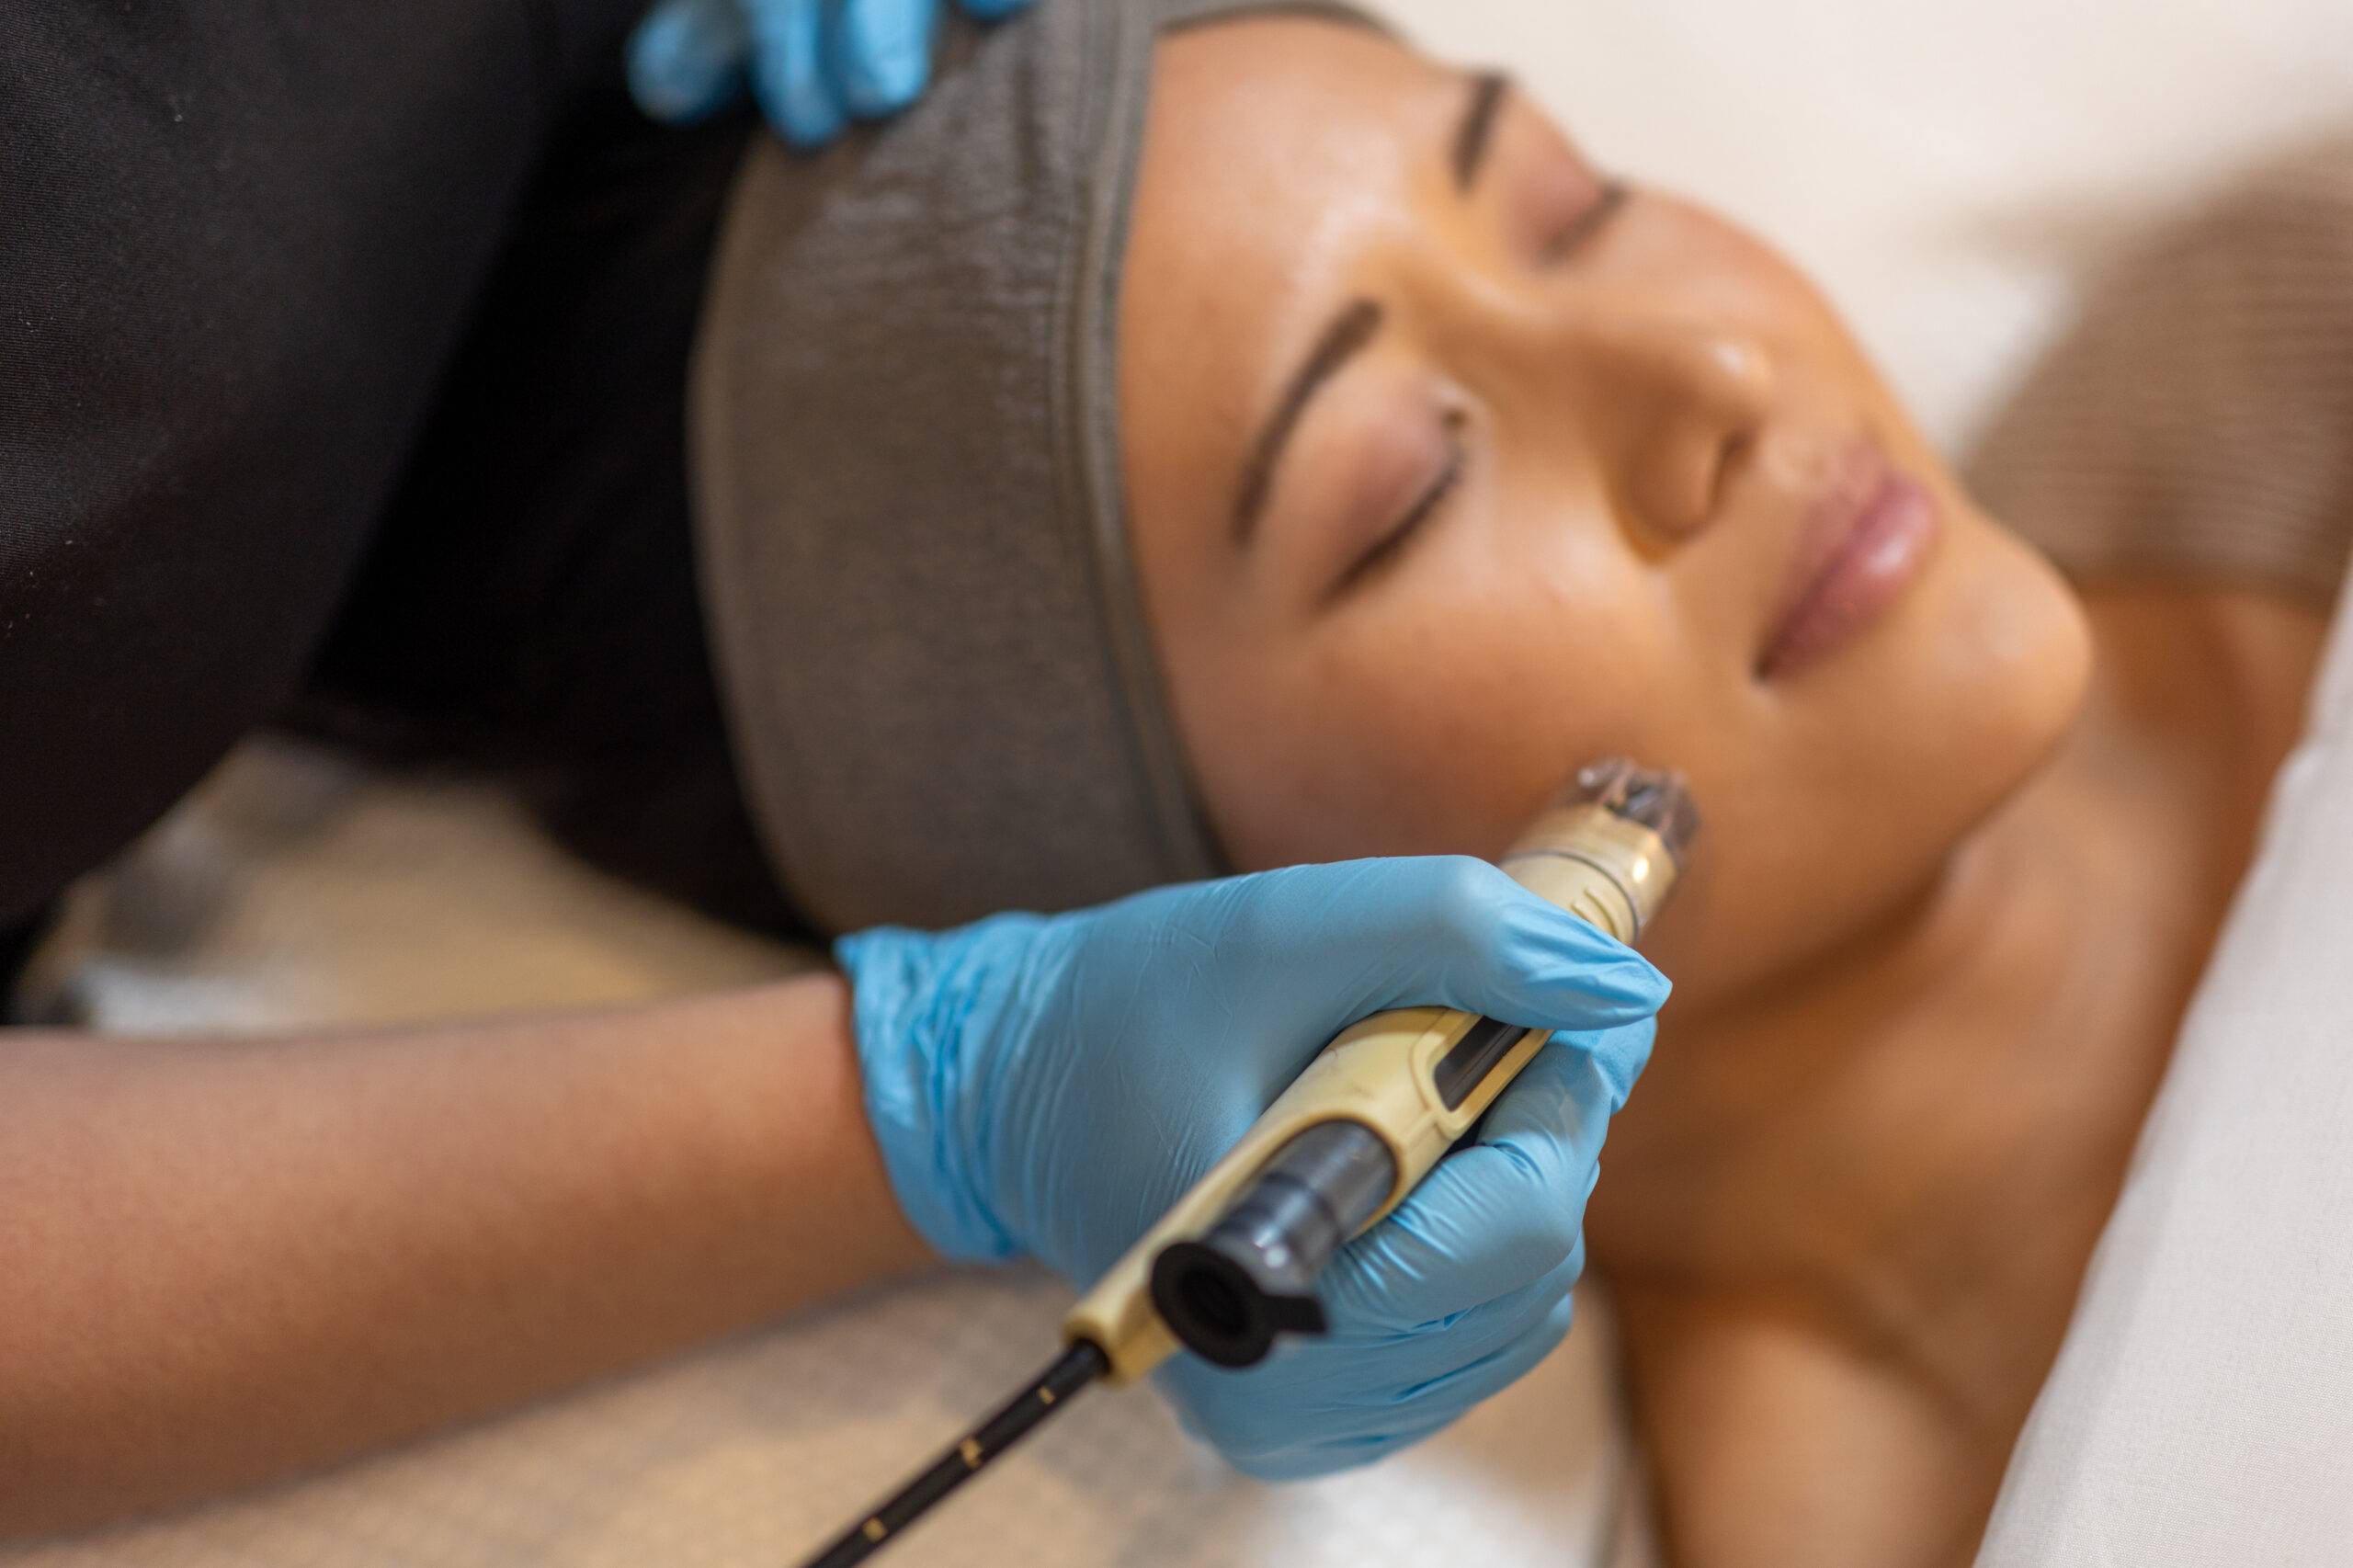 A woman is receiving a dermafrac treatment with a modern device handled by a skincare professional wearing blue gloves. The woman appears relaxed and has her eyes closed.